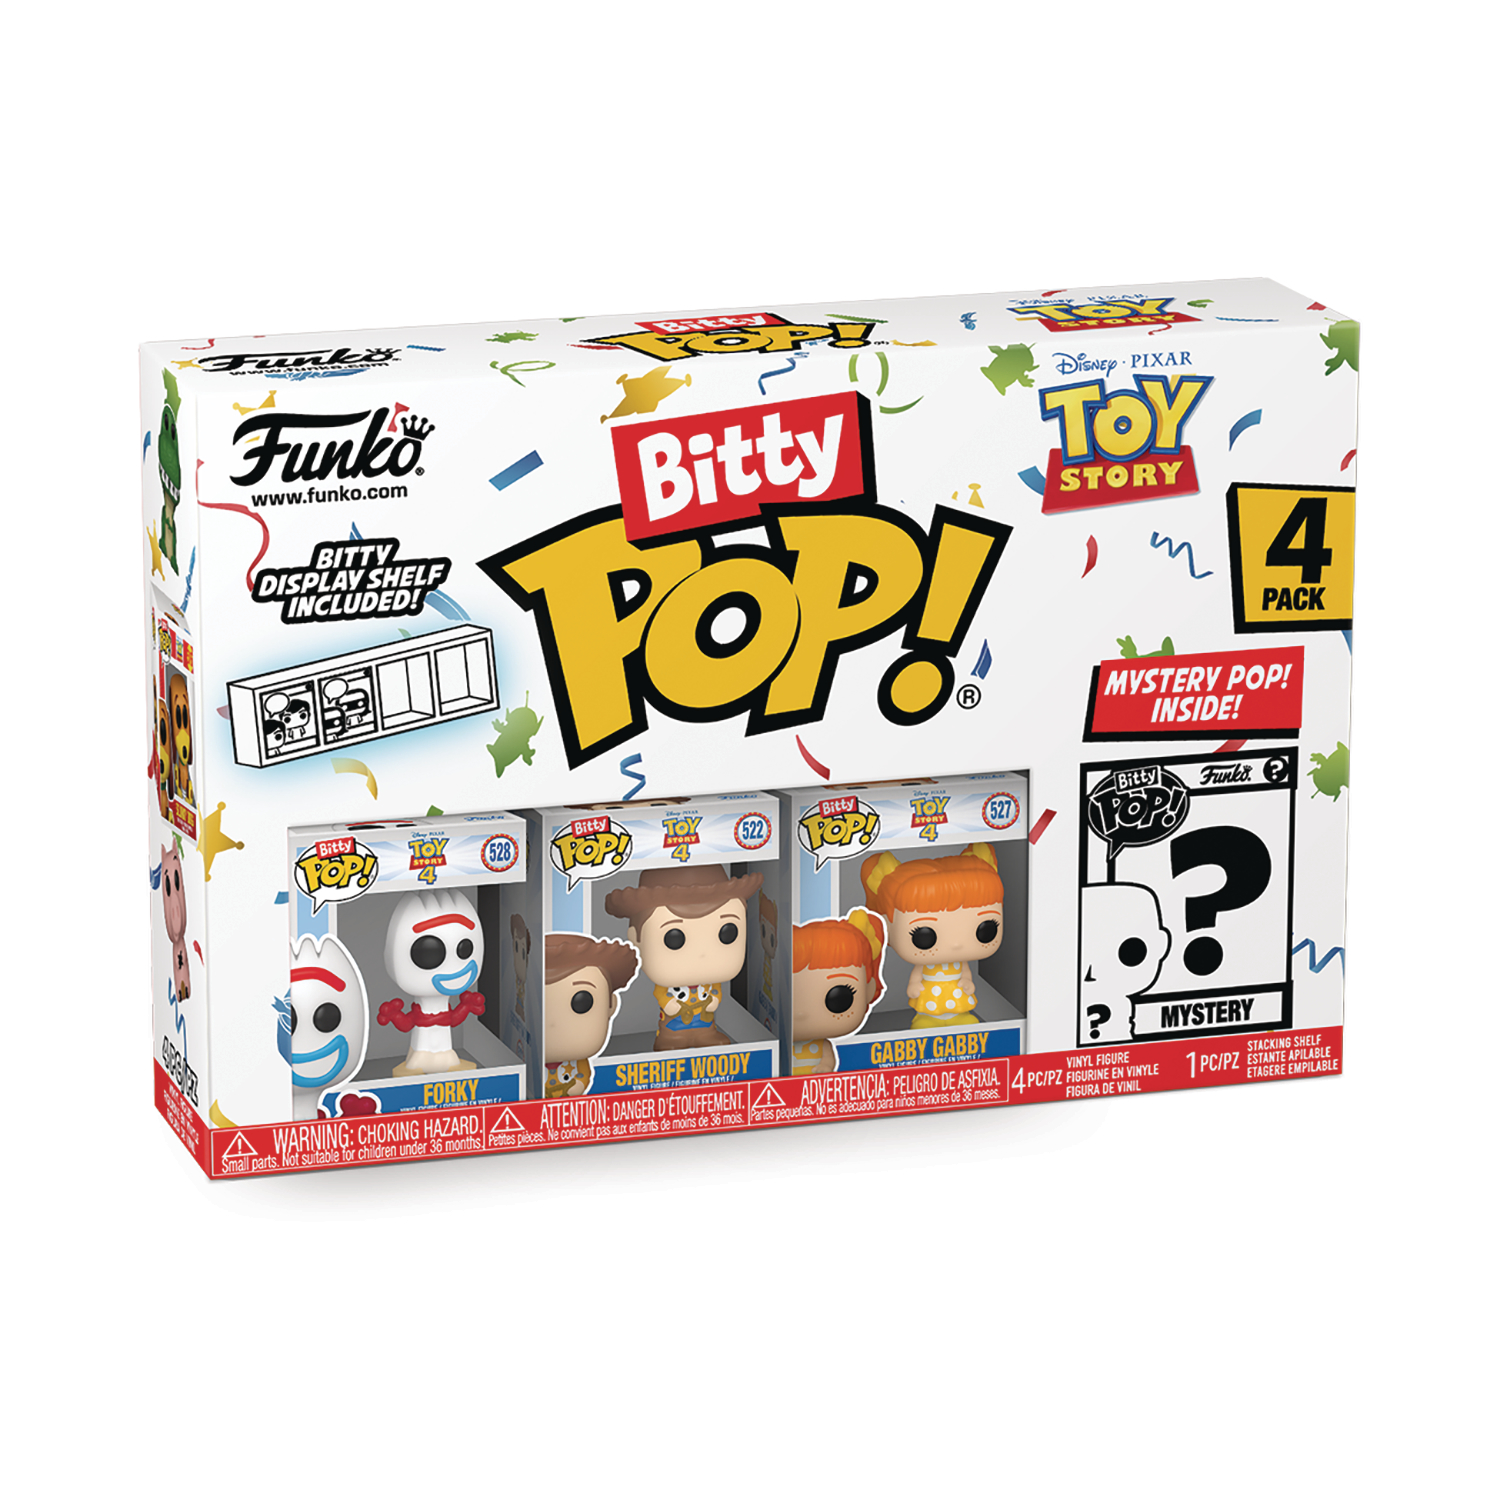 Bitty Pop Toy Story Forky 4-Pack Figure